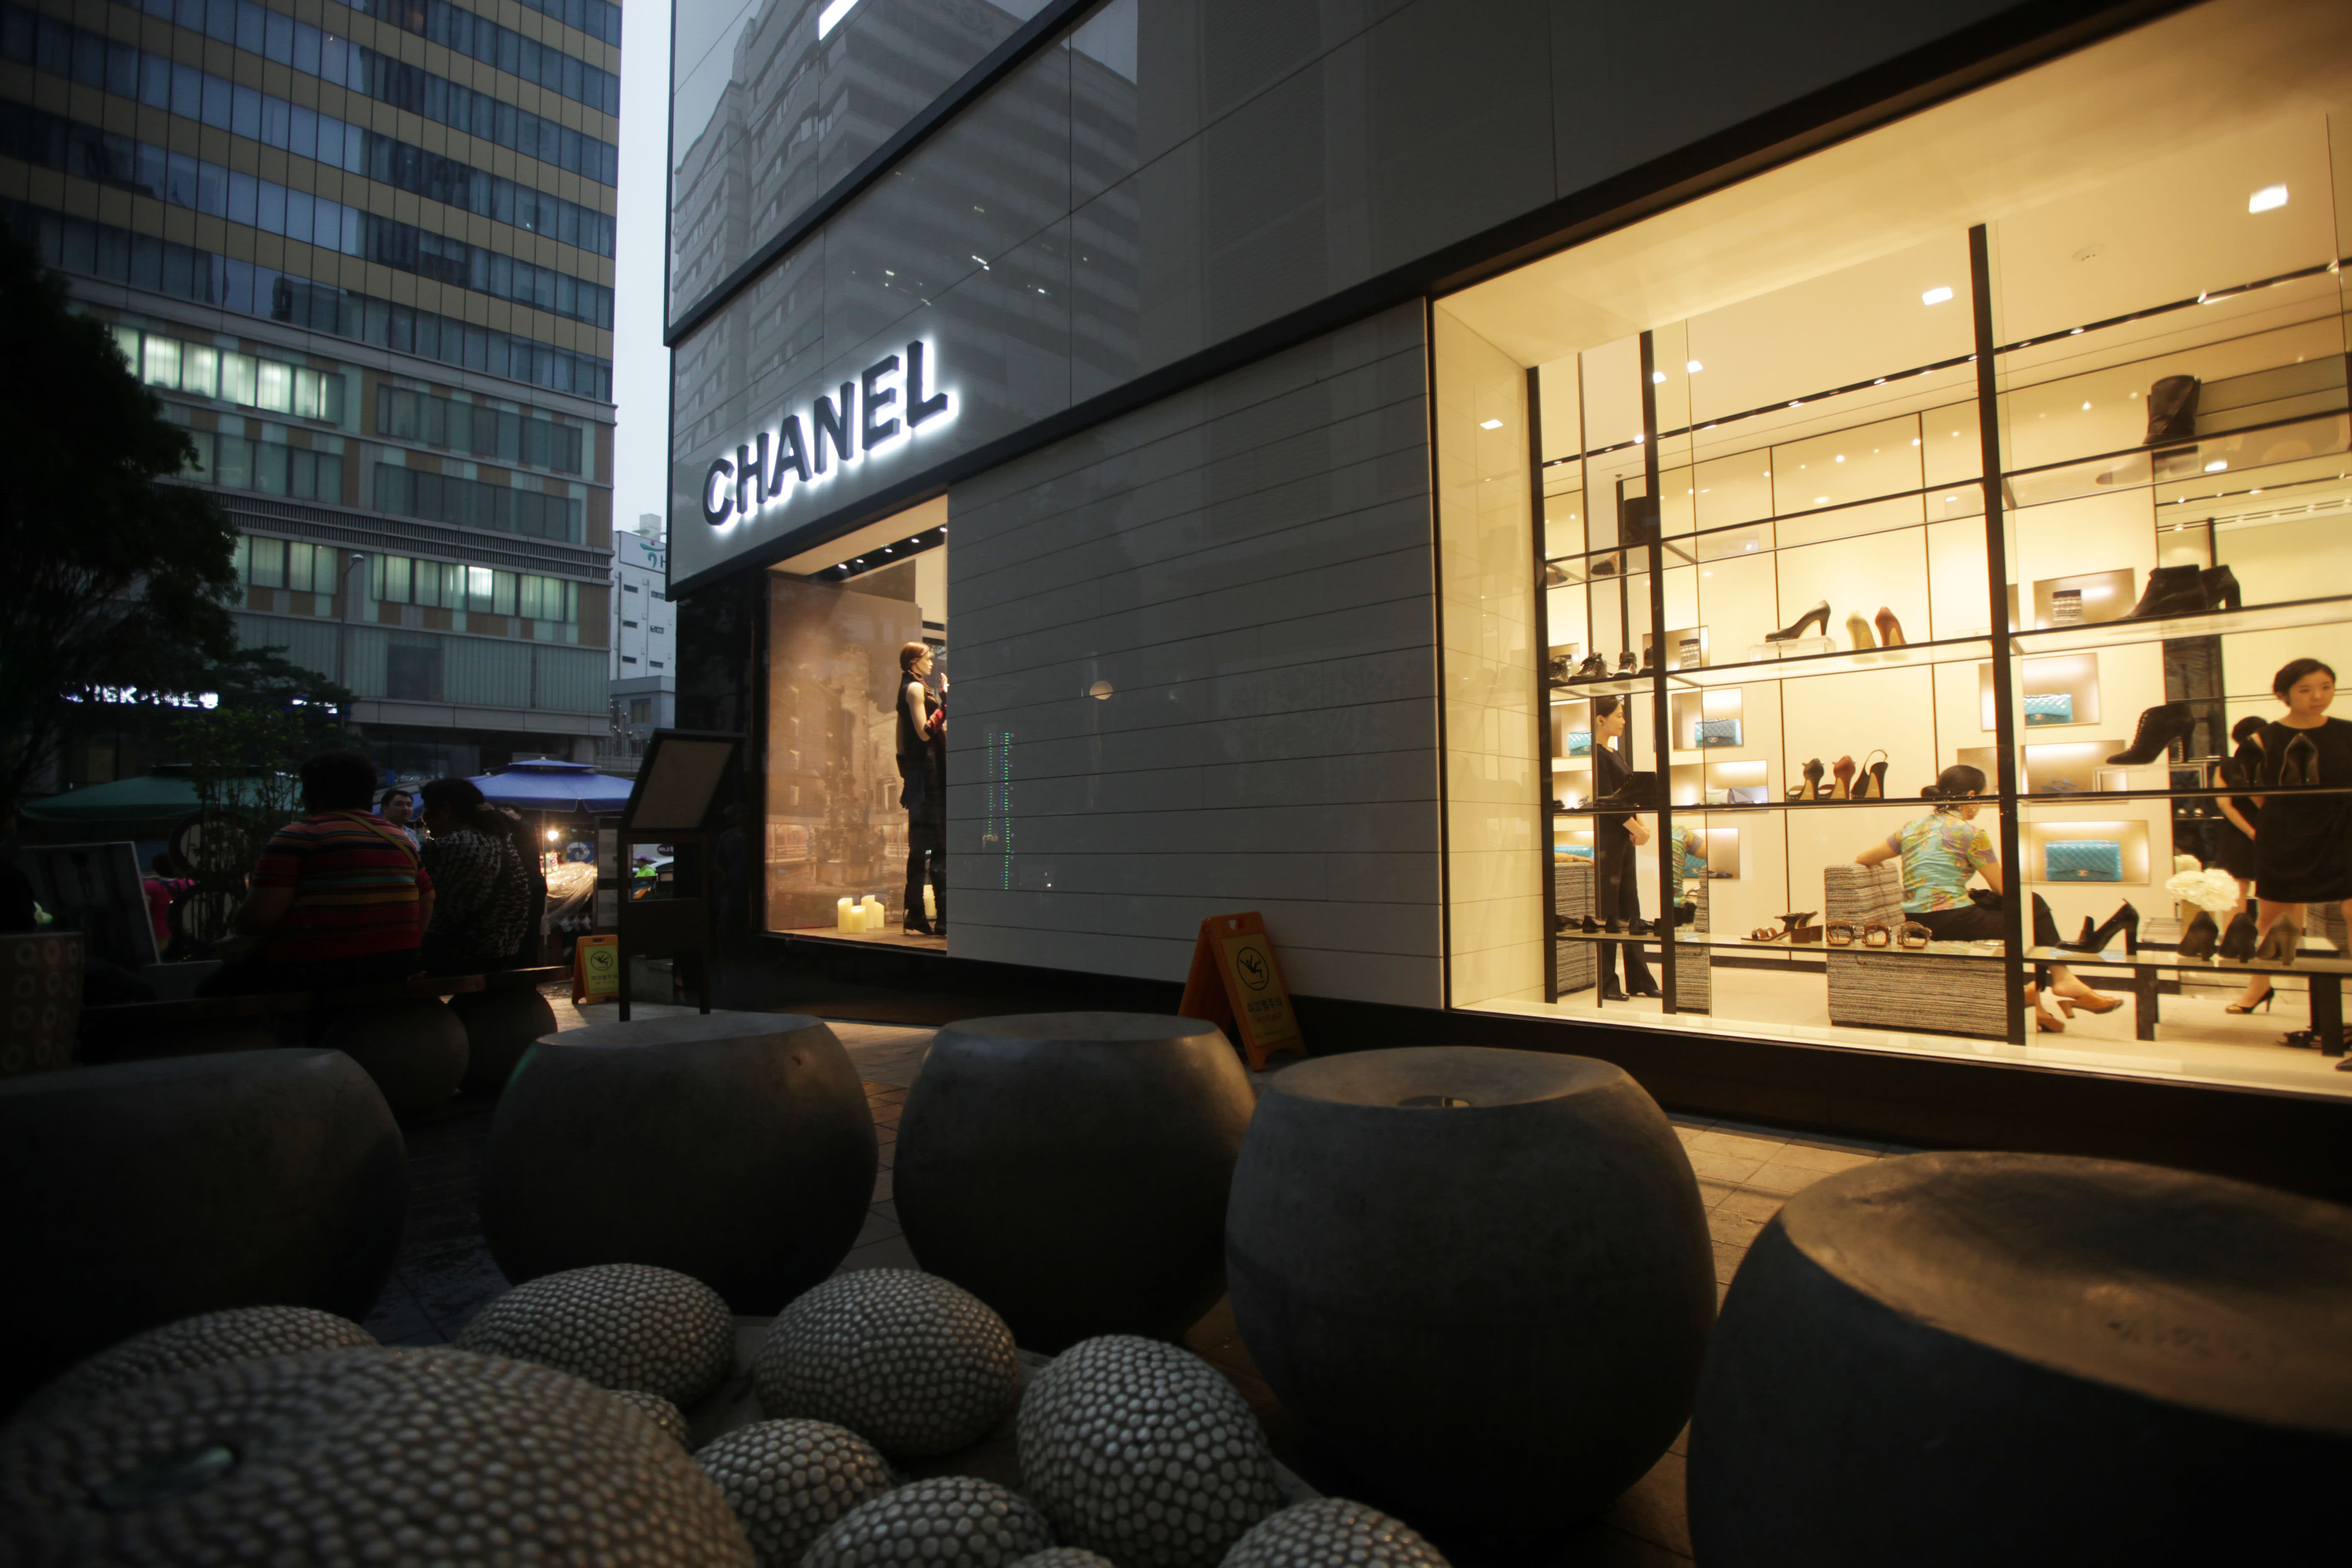 South Korean shoppers go the distance to beat Chanel price hike